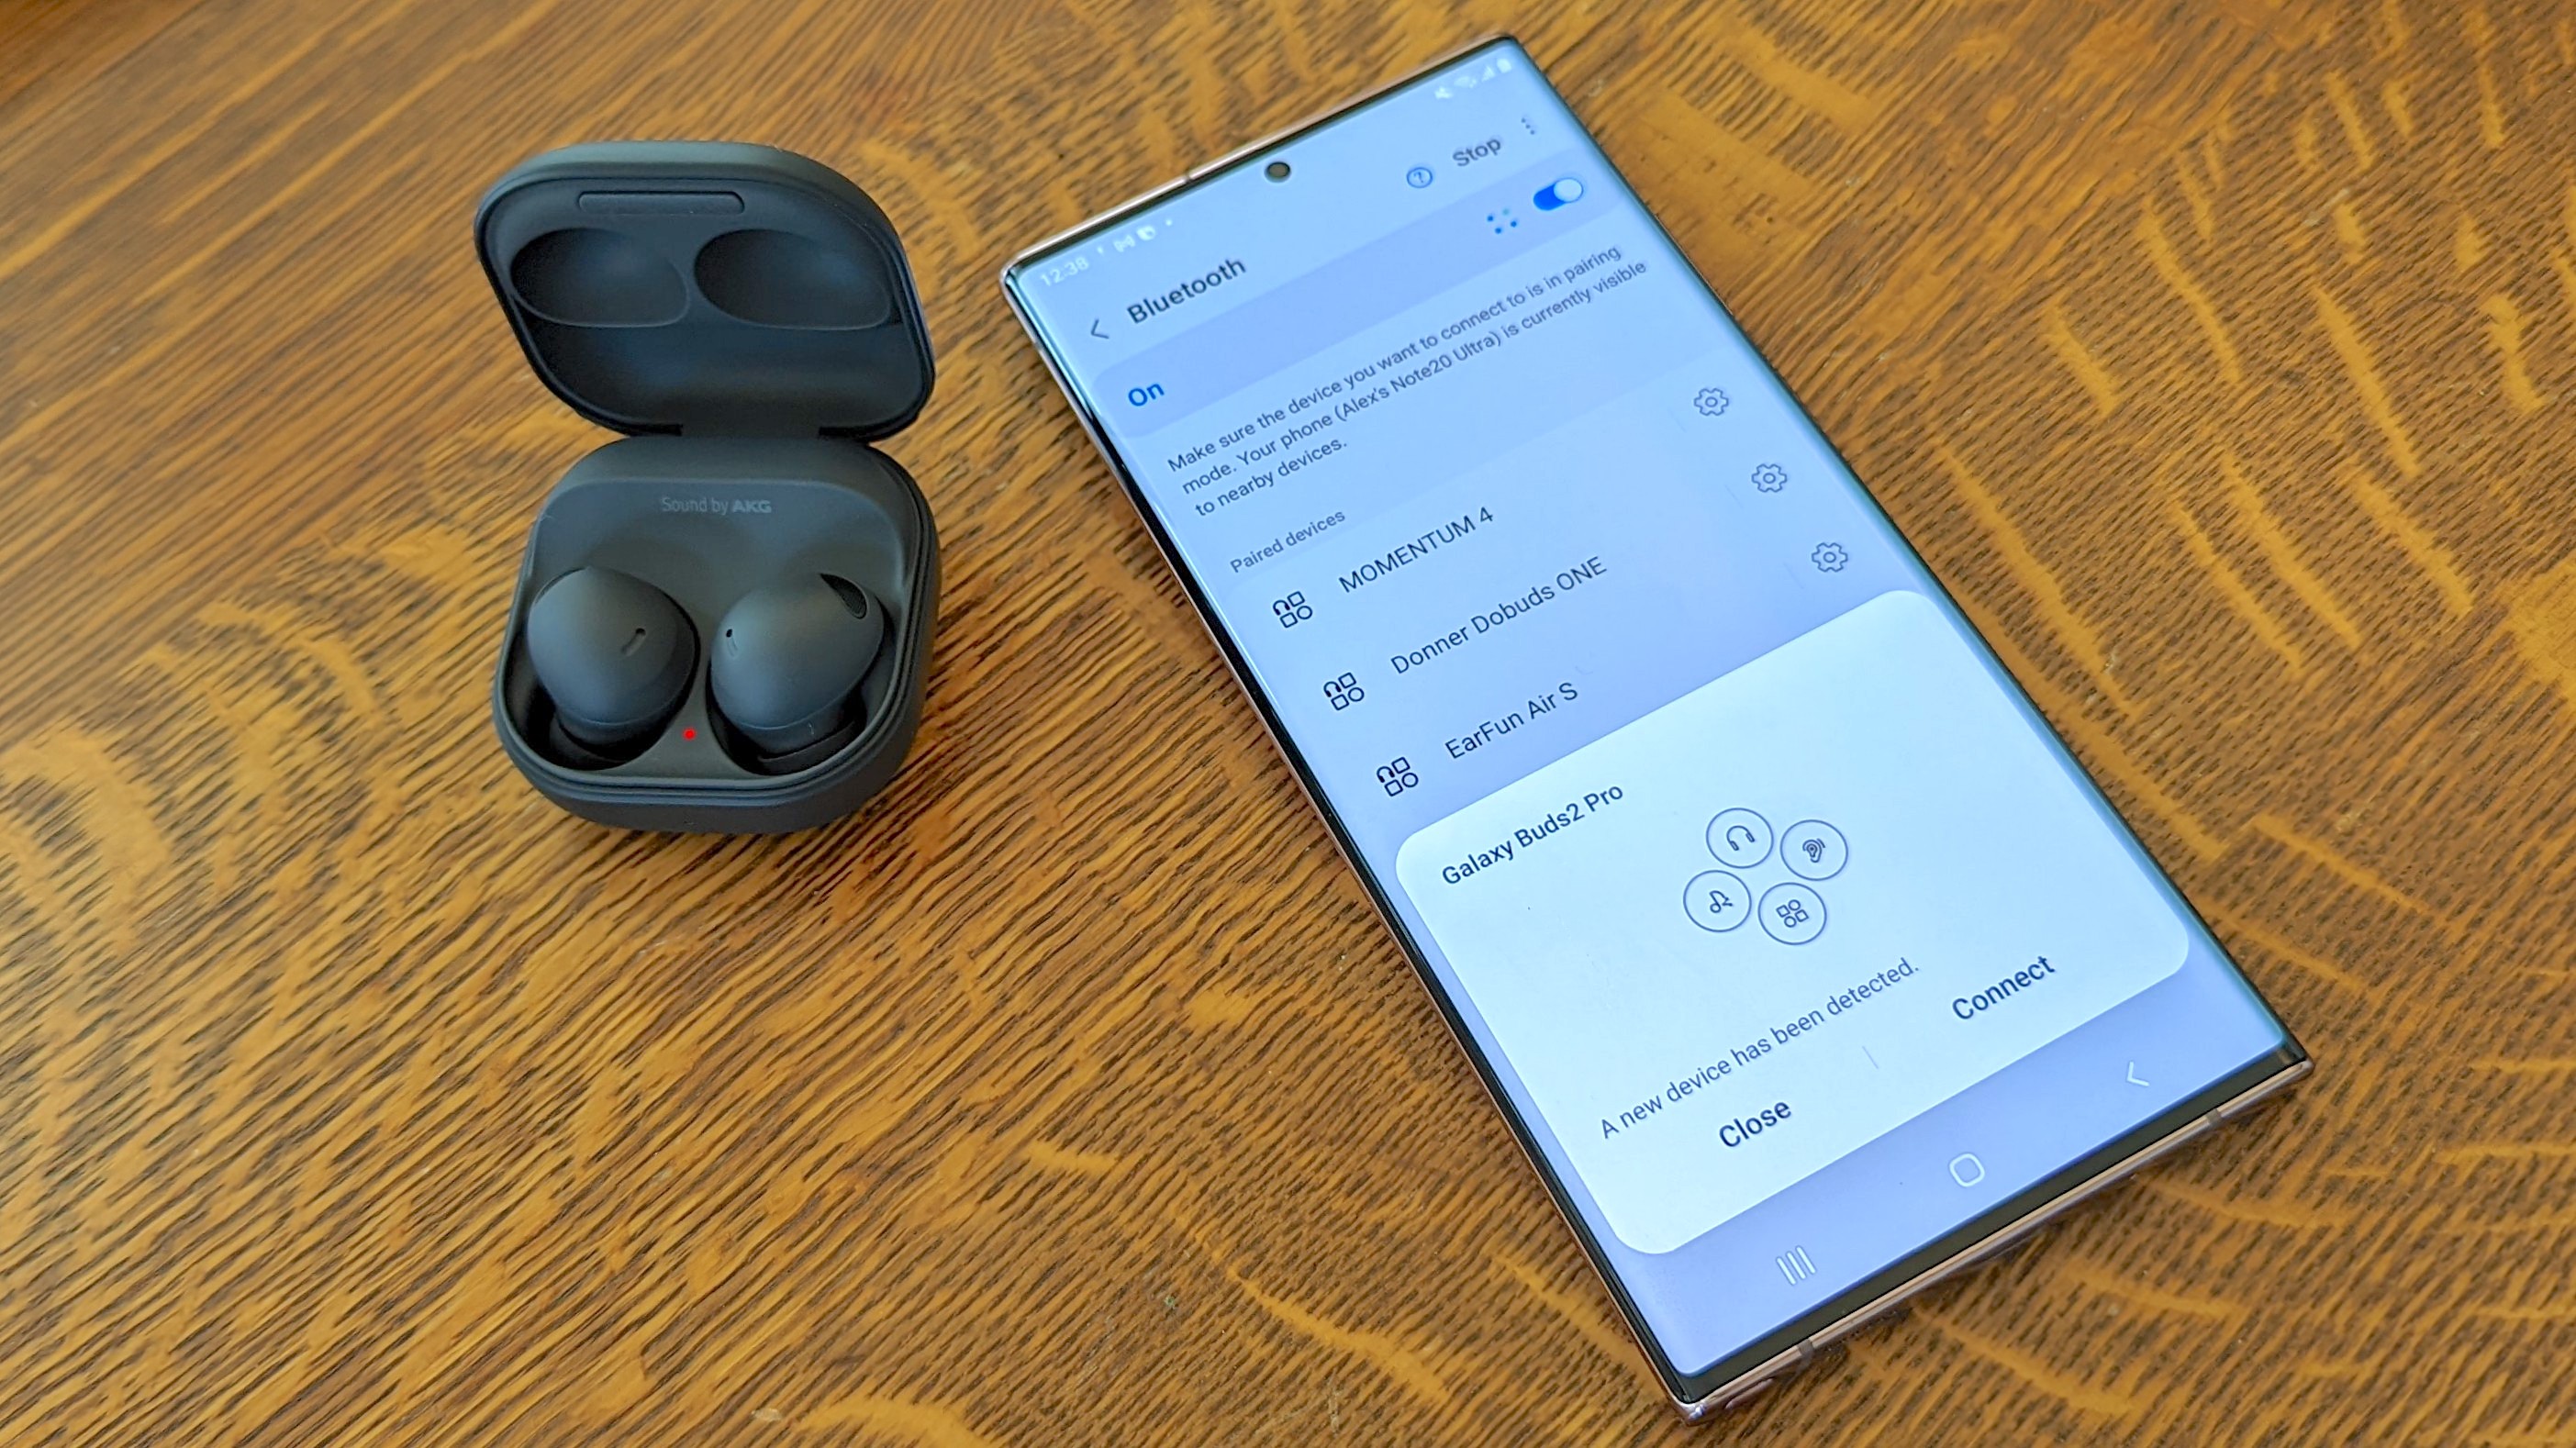 Samsung;'s Easy Pairing mode enabled on the Samsung Galaxy Buds 2 Pro